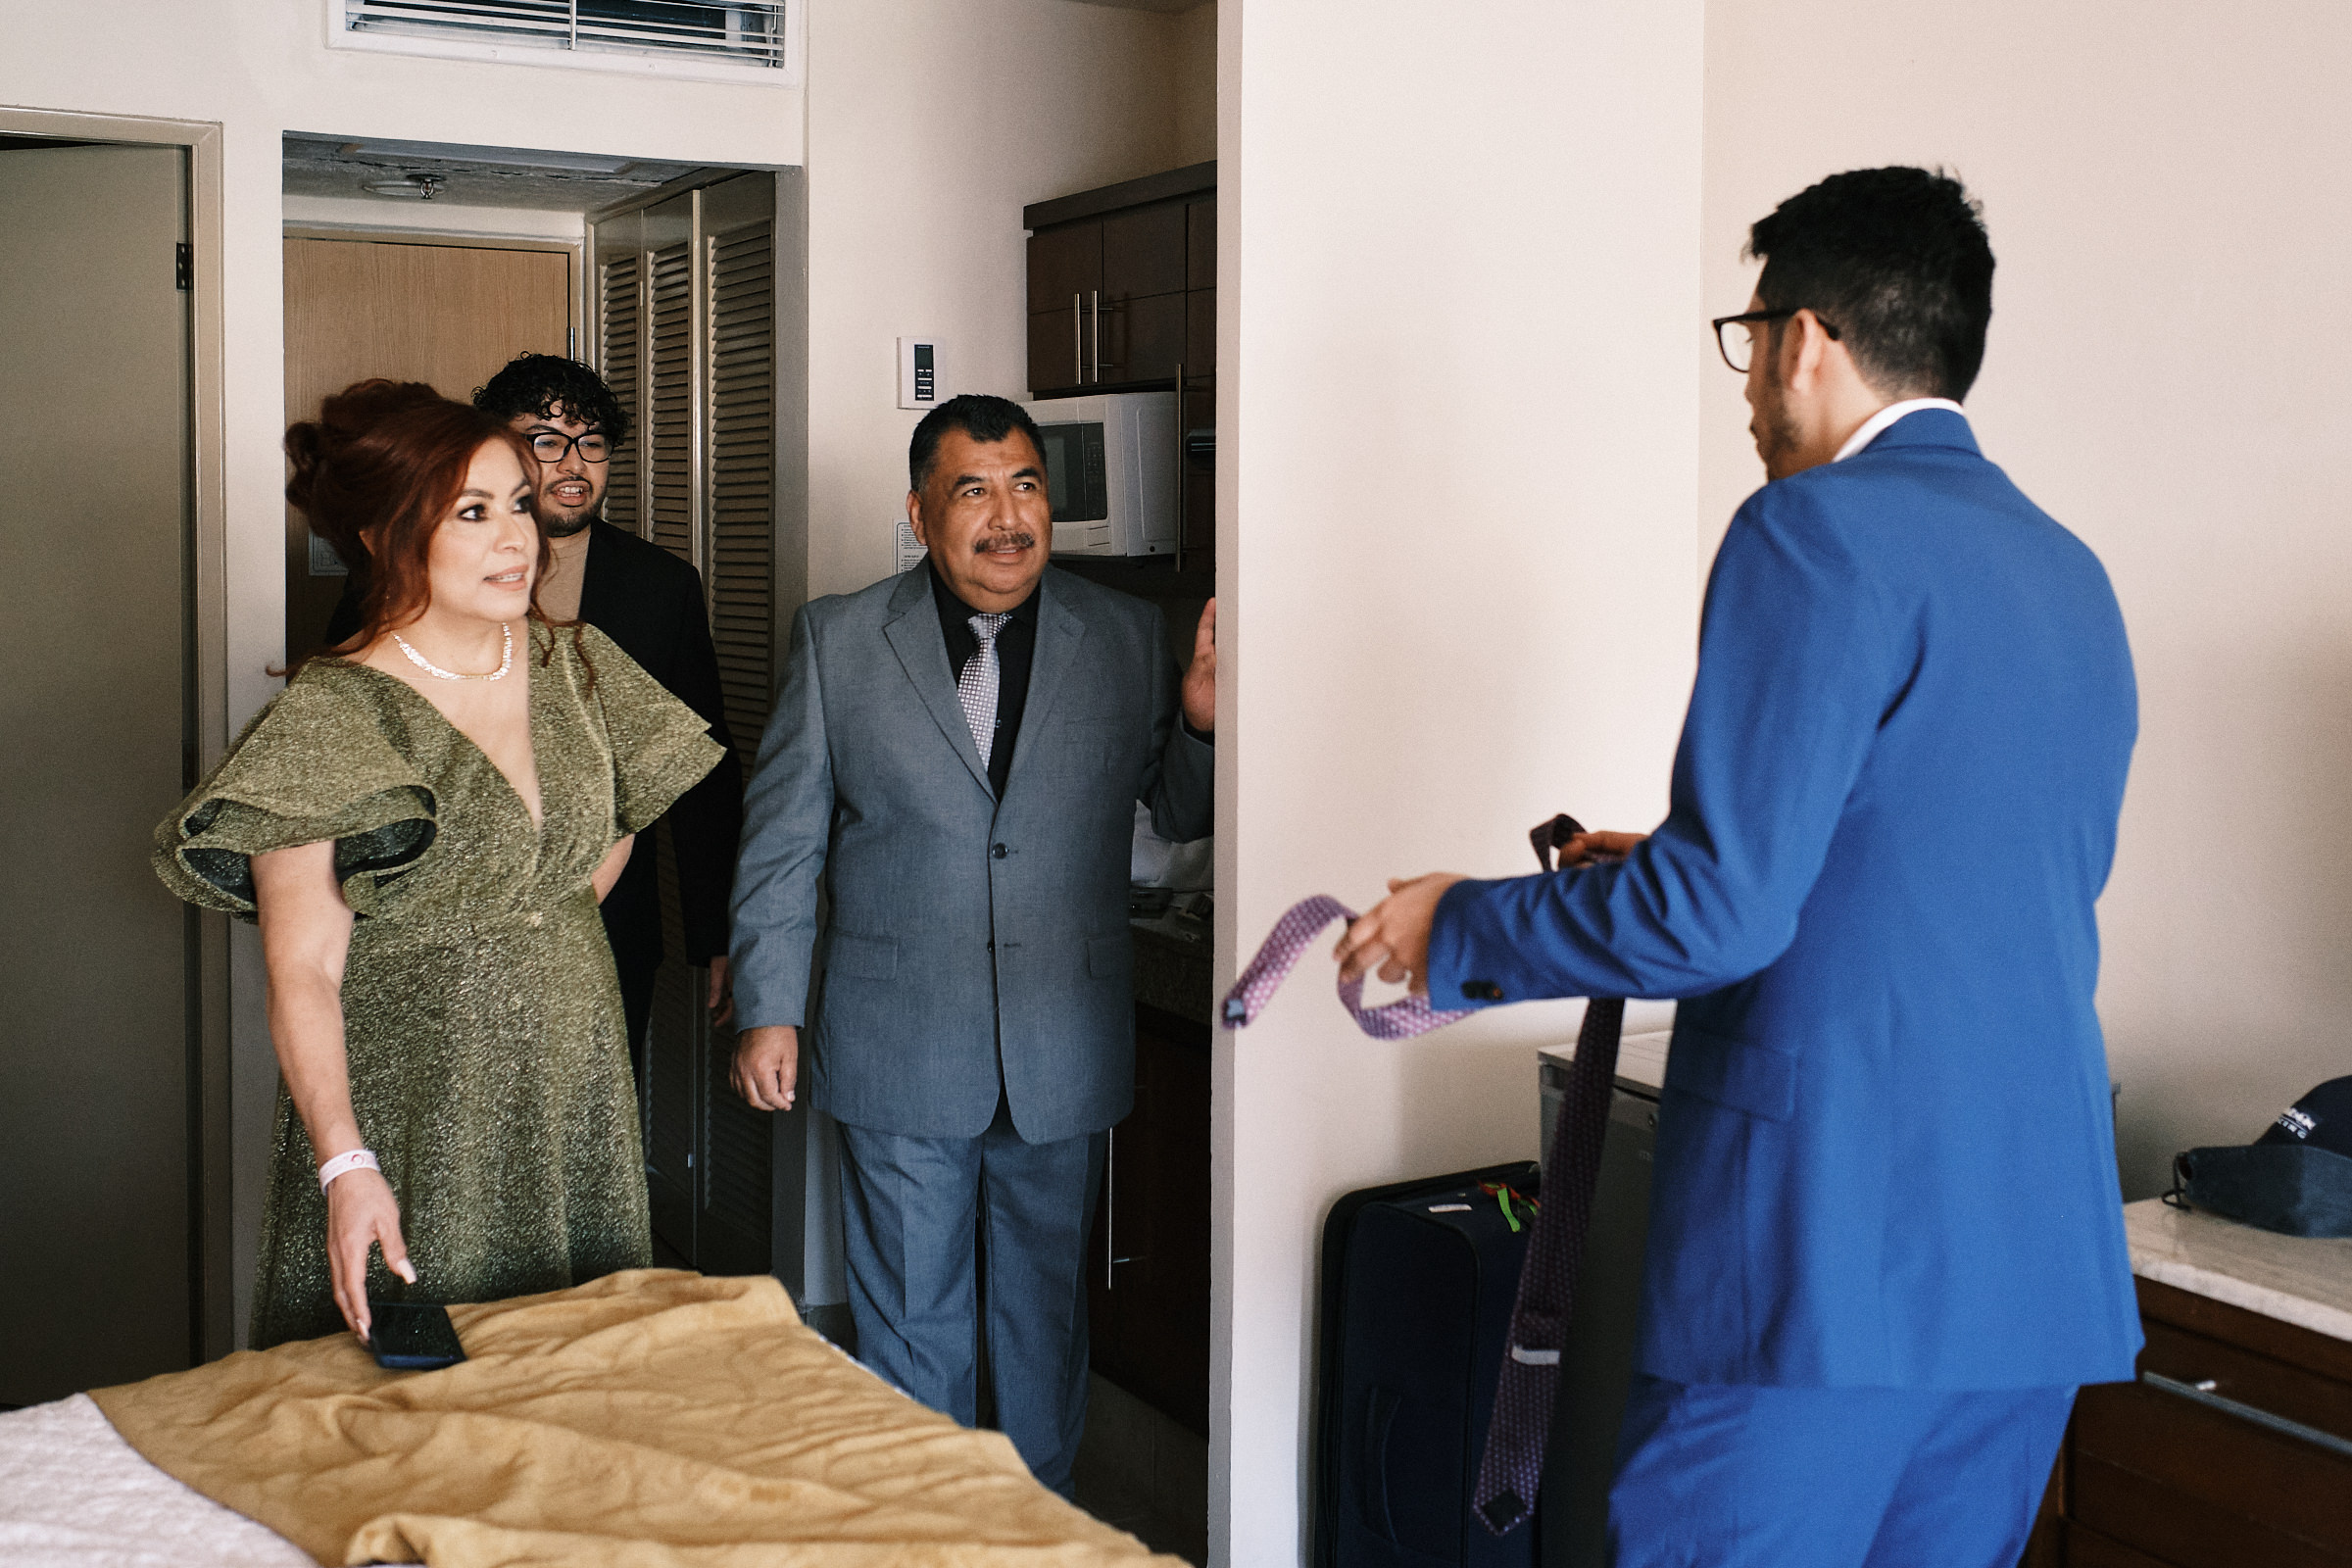 Groom Brings Tie To His Parents And Brother In Hotel Canto Del Sol